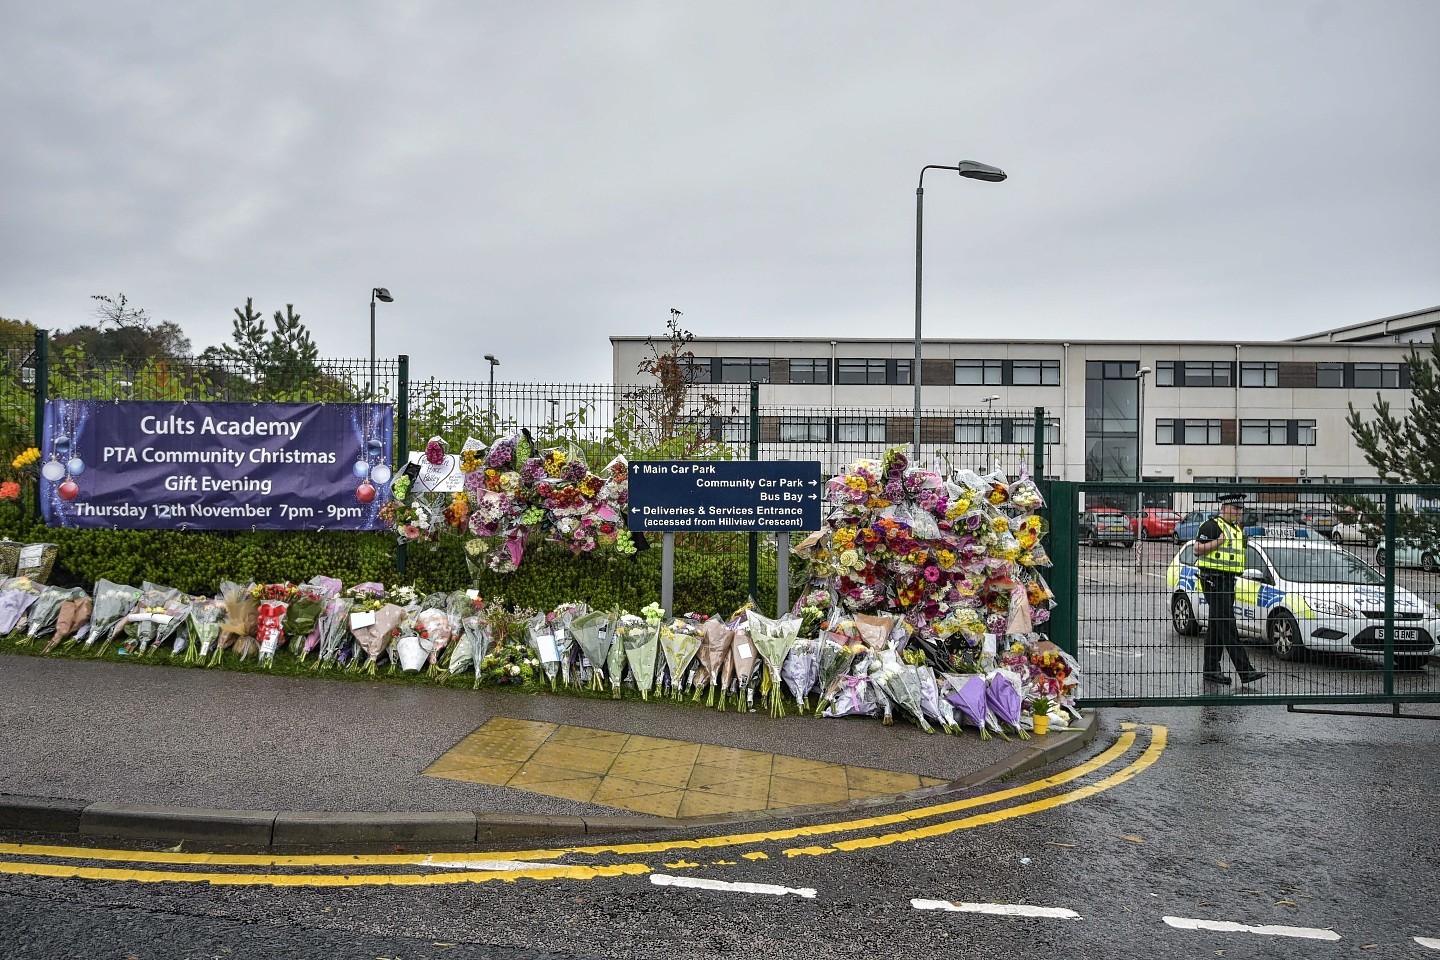 The floral tributes continue to grow